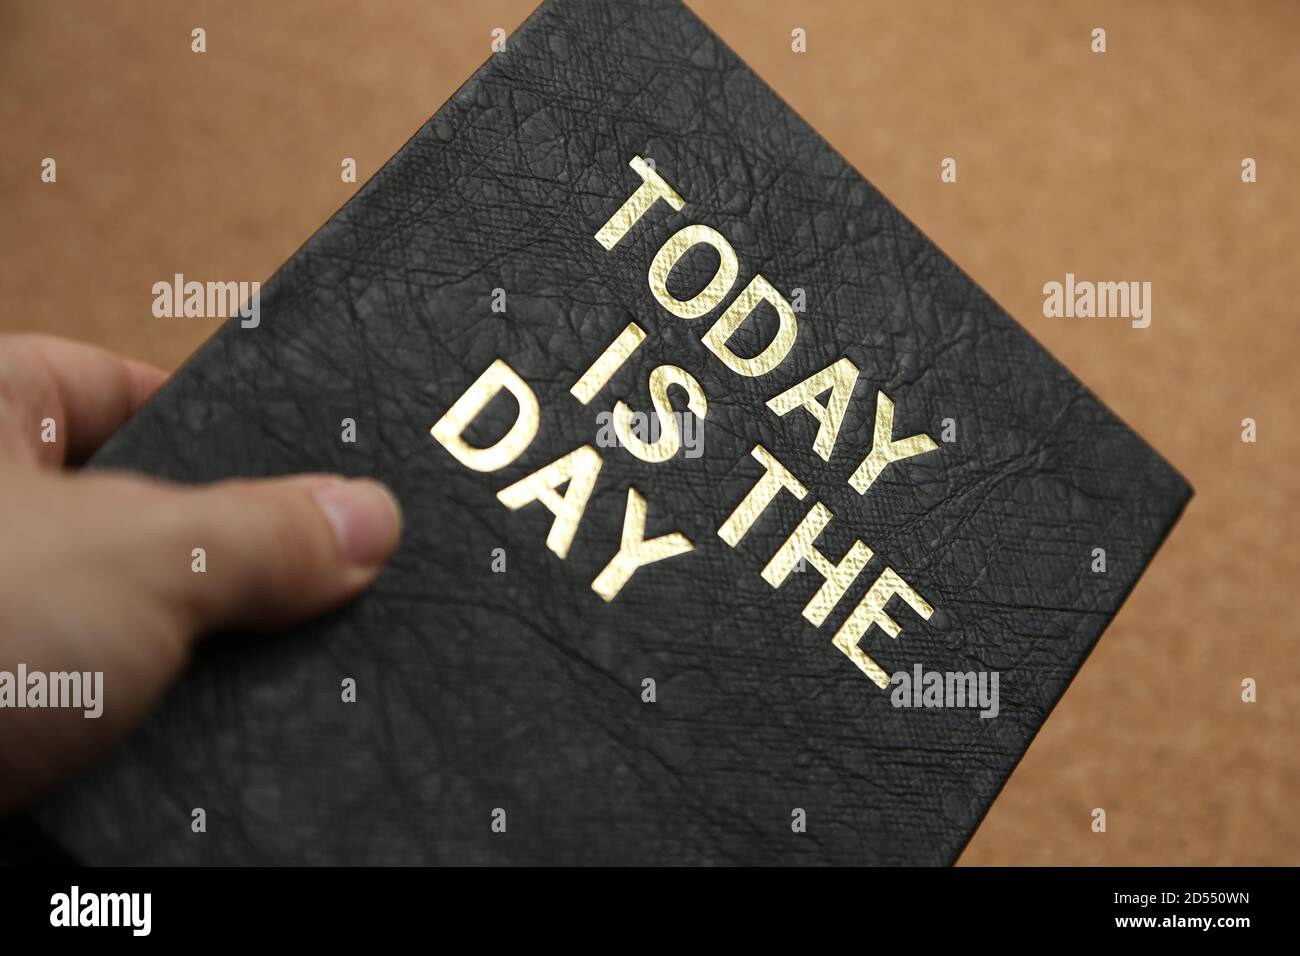 Black copybook with 'Today is the day' written on it Stock Photo